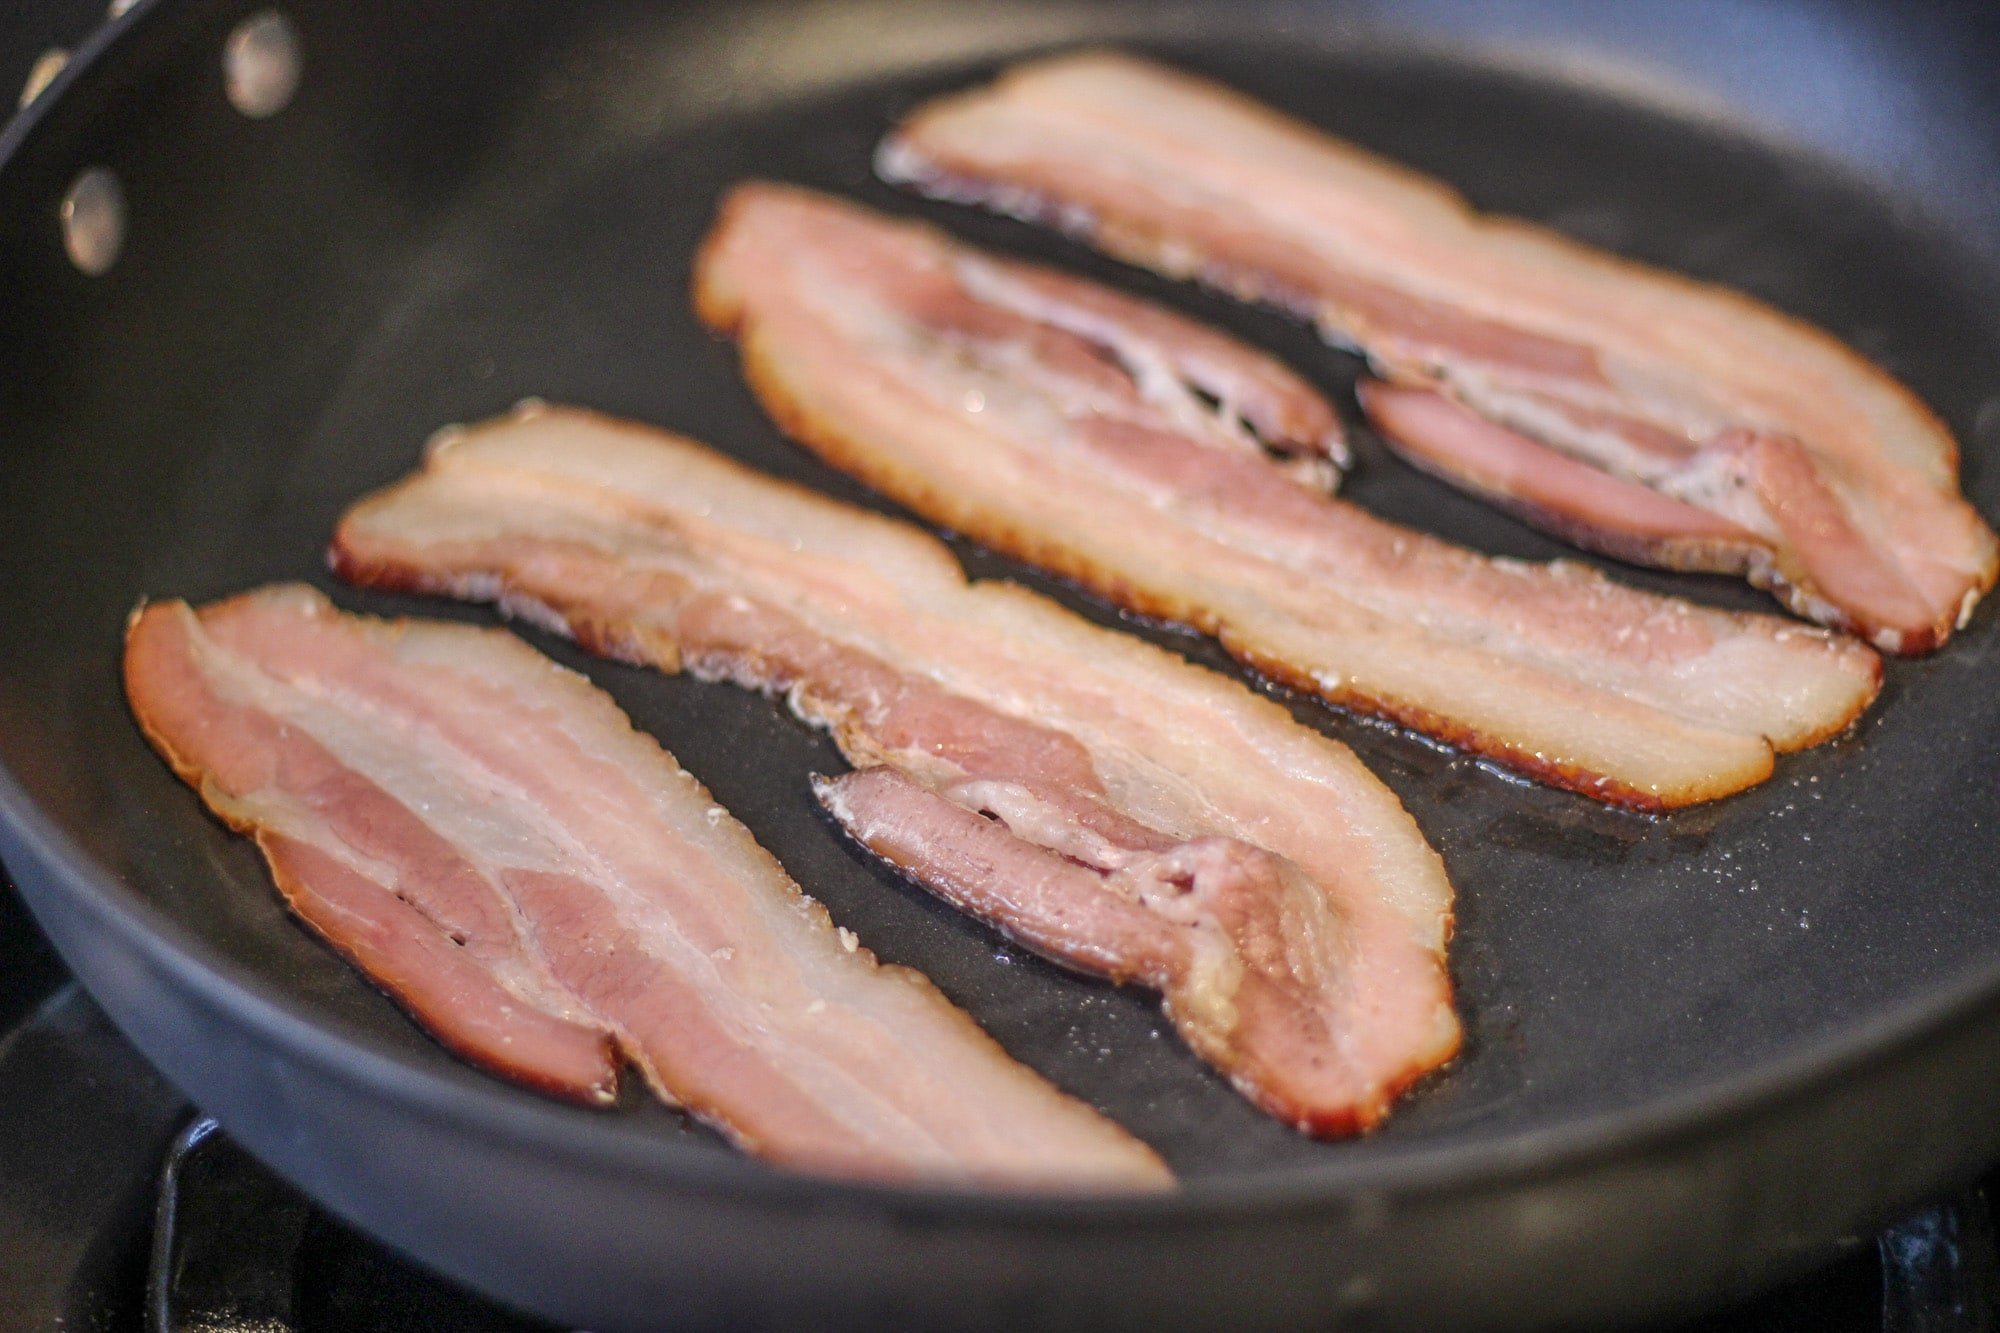 sous vide bacon recipe finished in a cast iron skillet